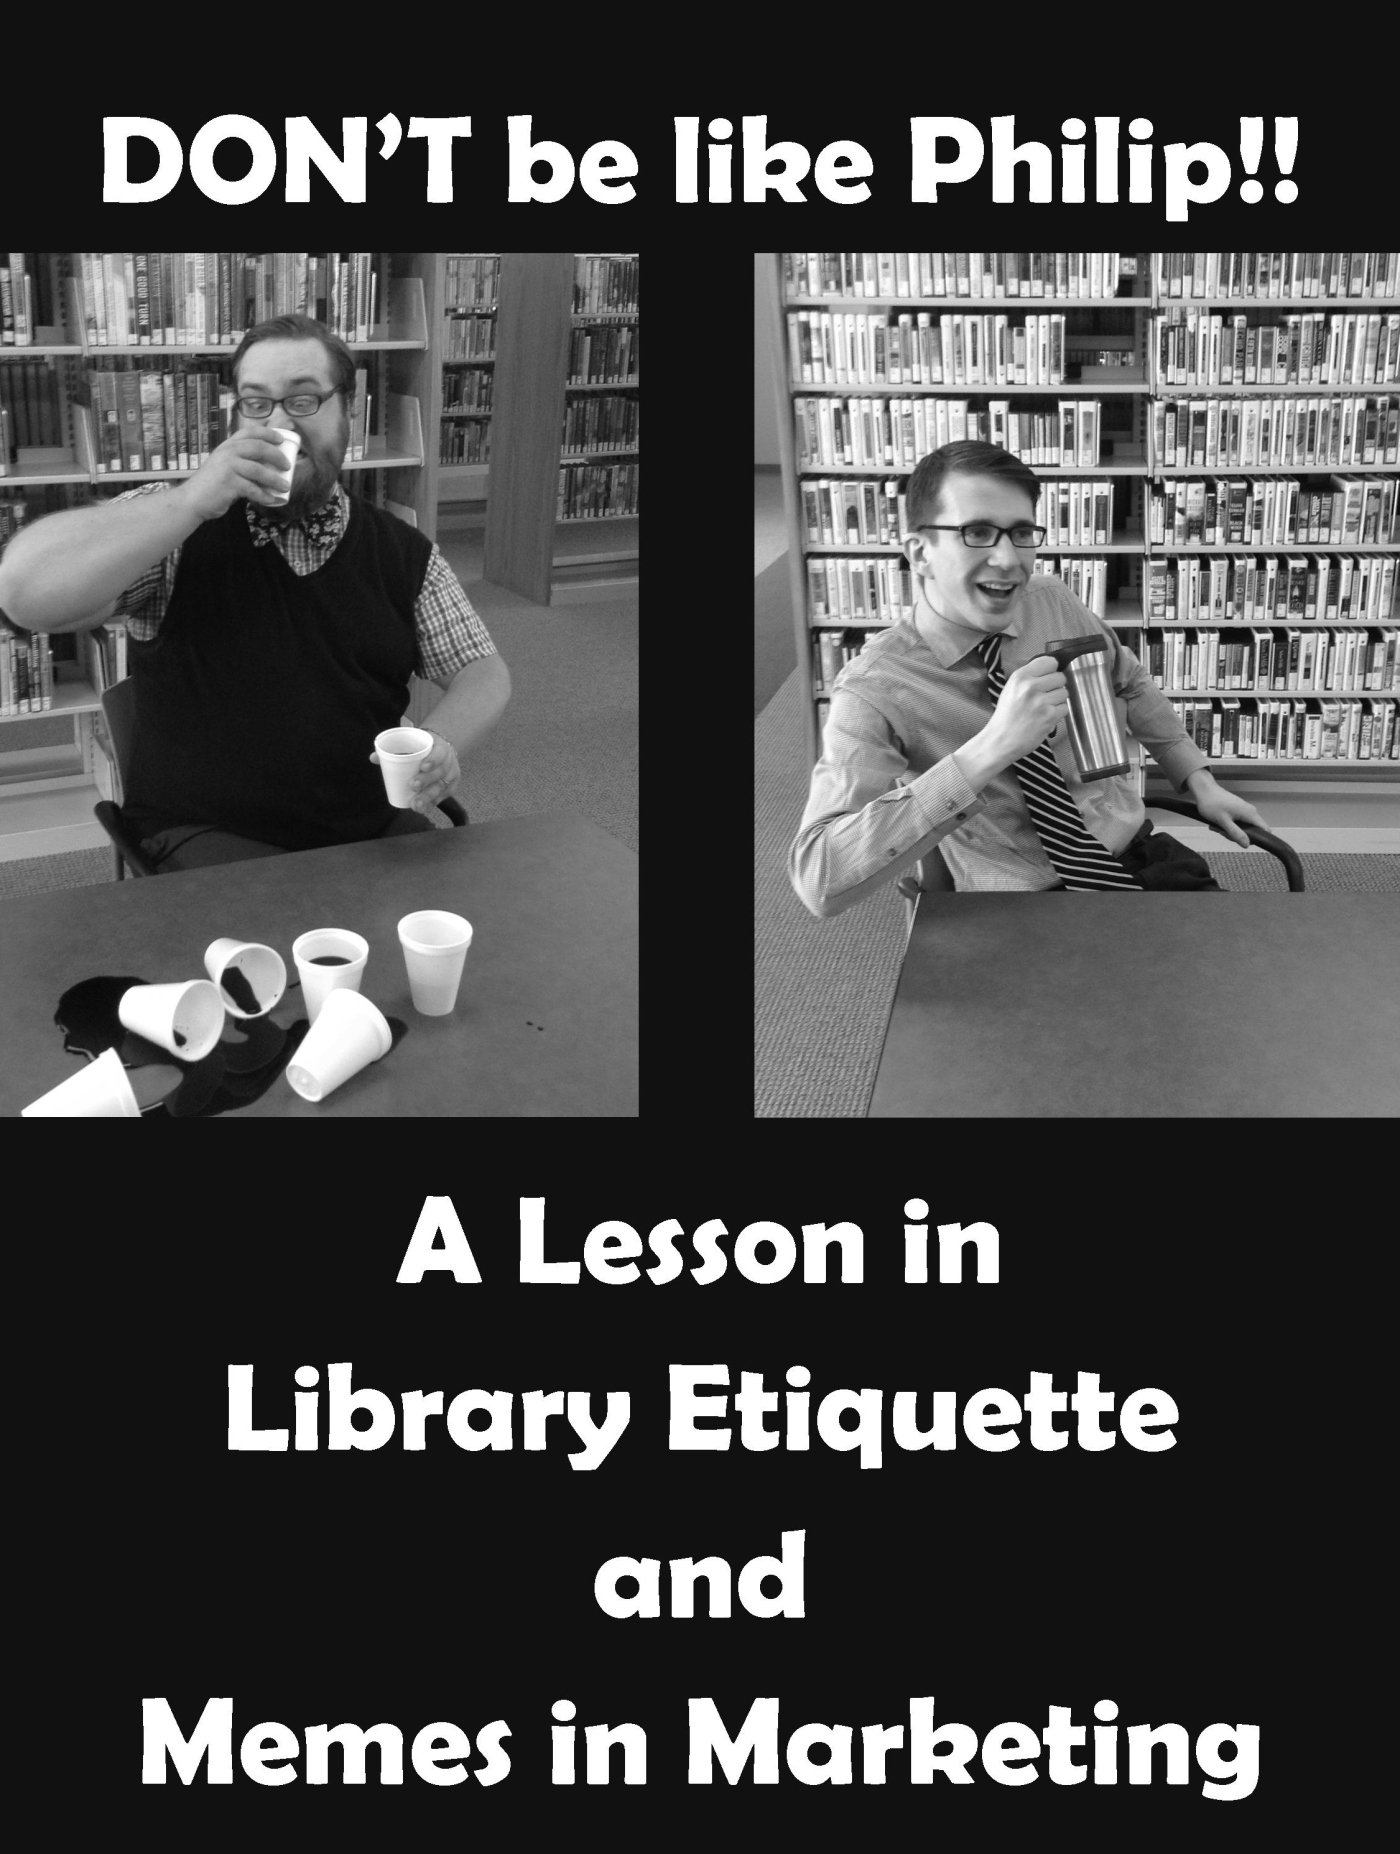 Library Etiquette and Memes in Marketing – The Lego Librarian